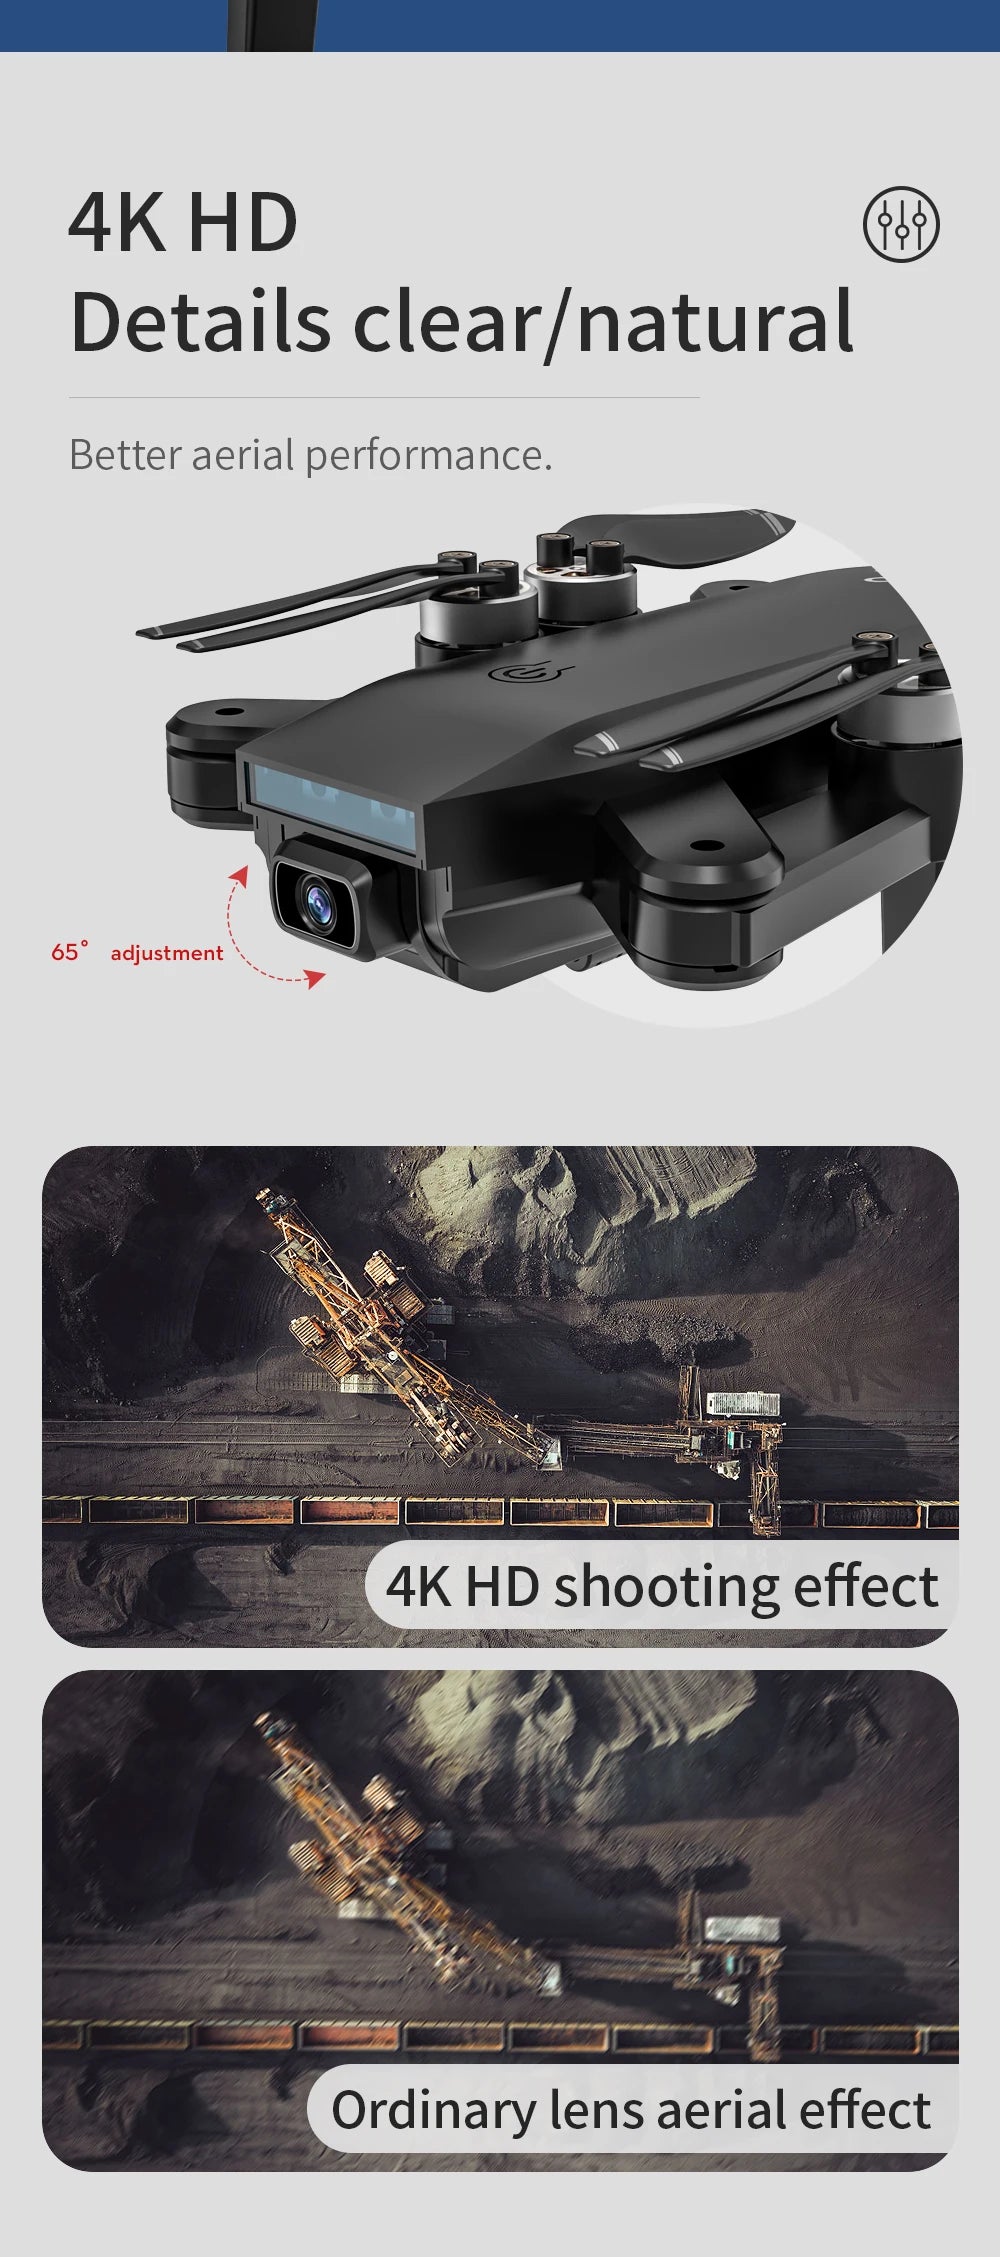 4k hd details clear/natural better aerial performance .